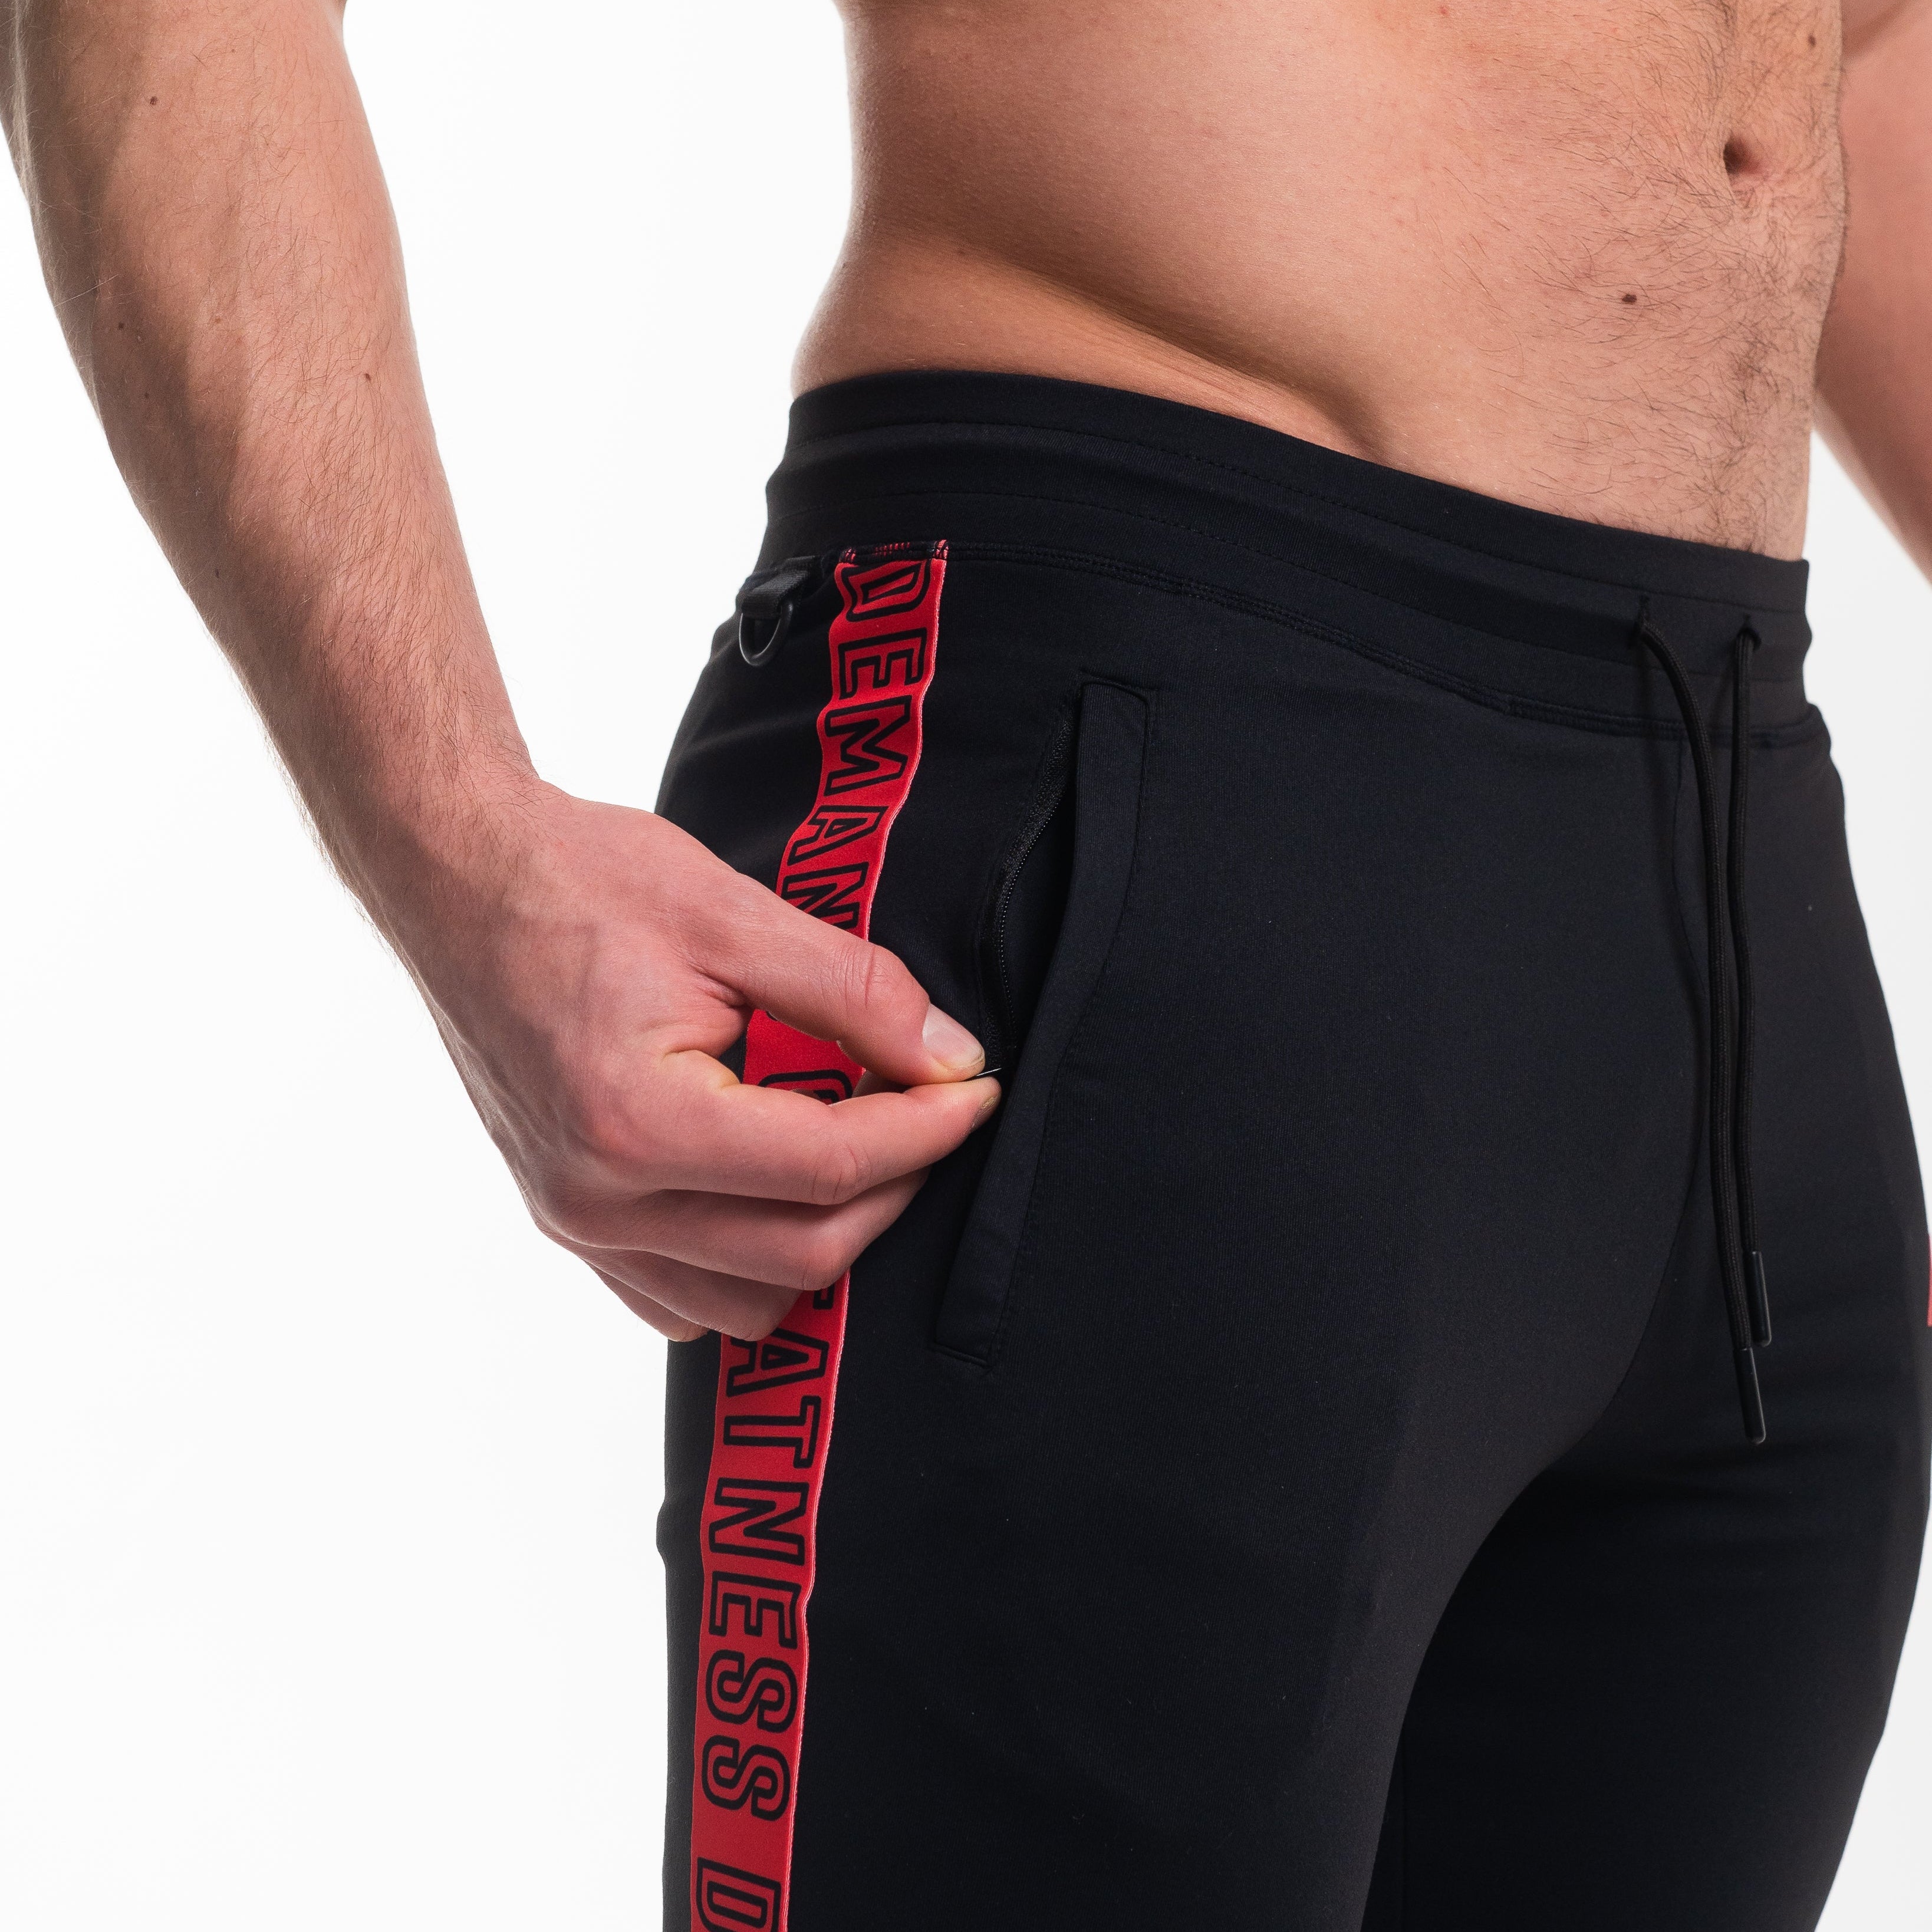 A7 Red Dawn Defy joggers are just as comfortable in the gym as they are going out. These are made with premium moisture-wicking 4-way-stretch material for greater range of motion. These are a great fit for both men and women. All A7 Powerlifting Equipment shipping to France, Spain, Ireland, Germany, Italy, Sweden and EU. 